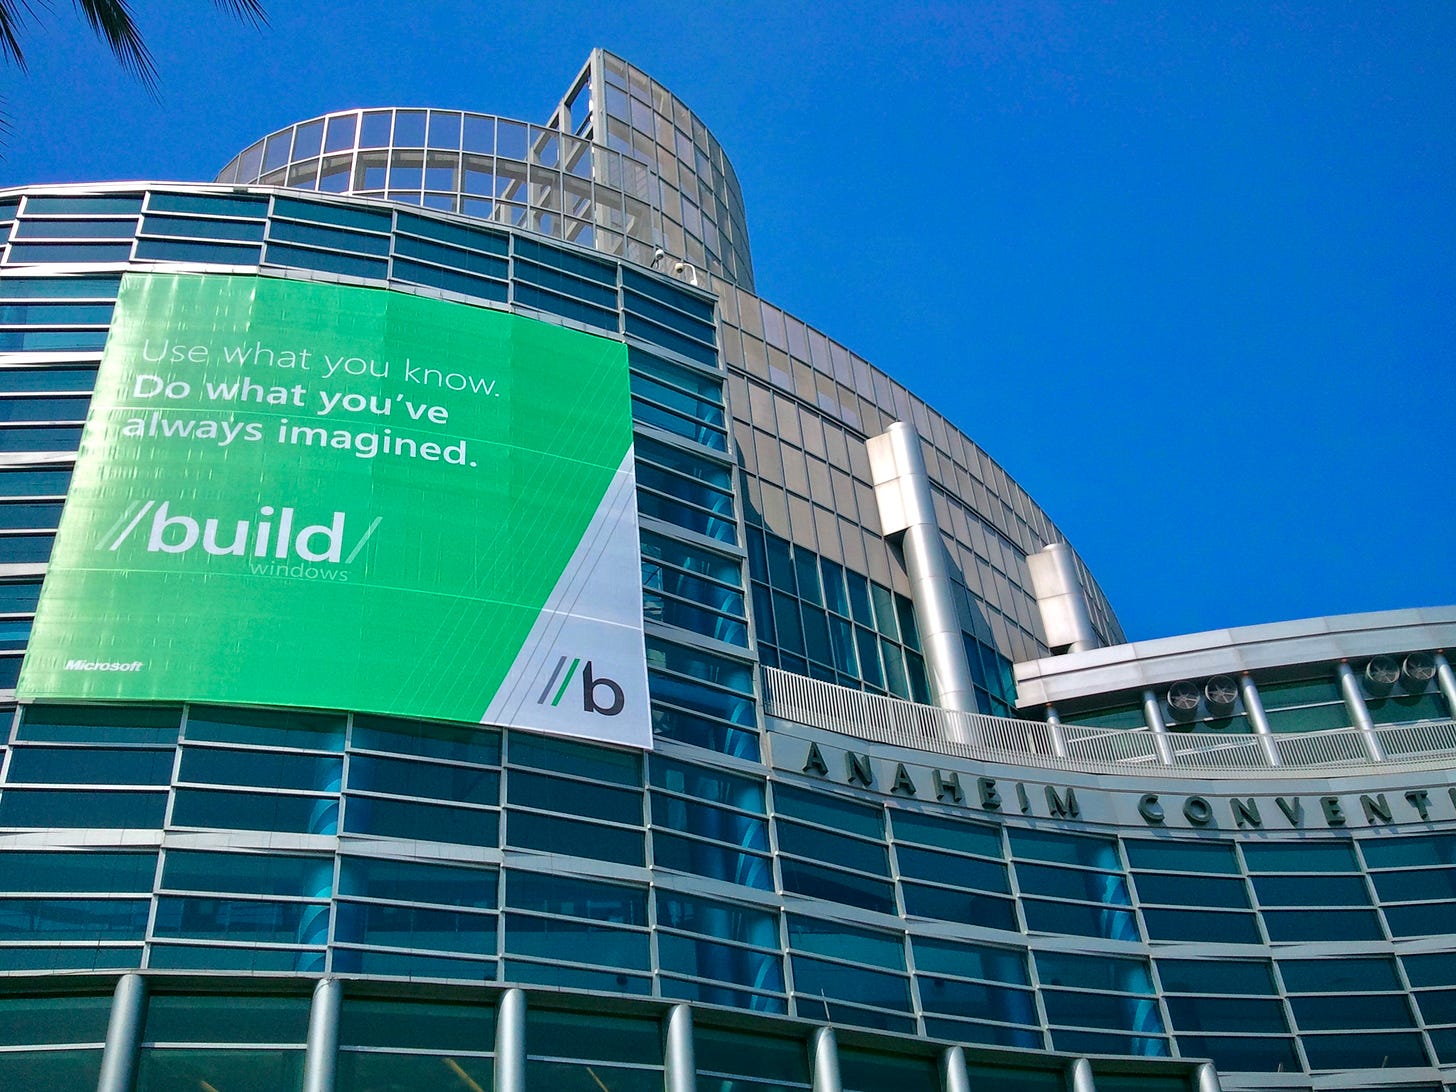 Photo of the front of the convention center. Sign says "Use what you know. Do what you've always imagined. //build